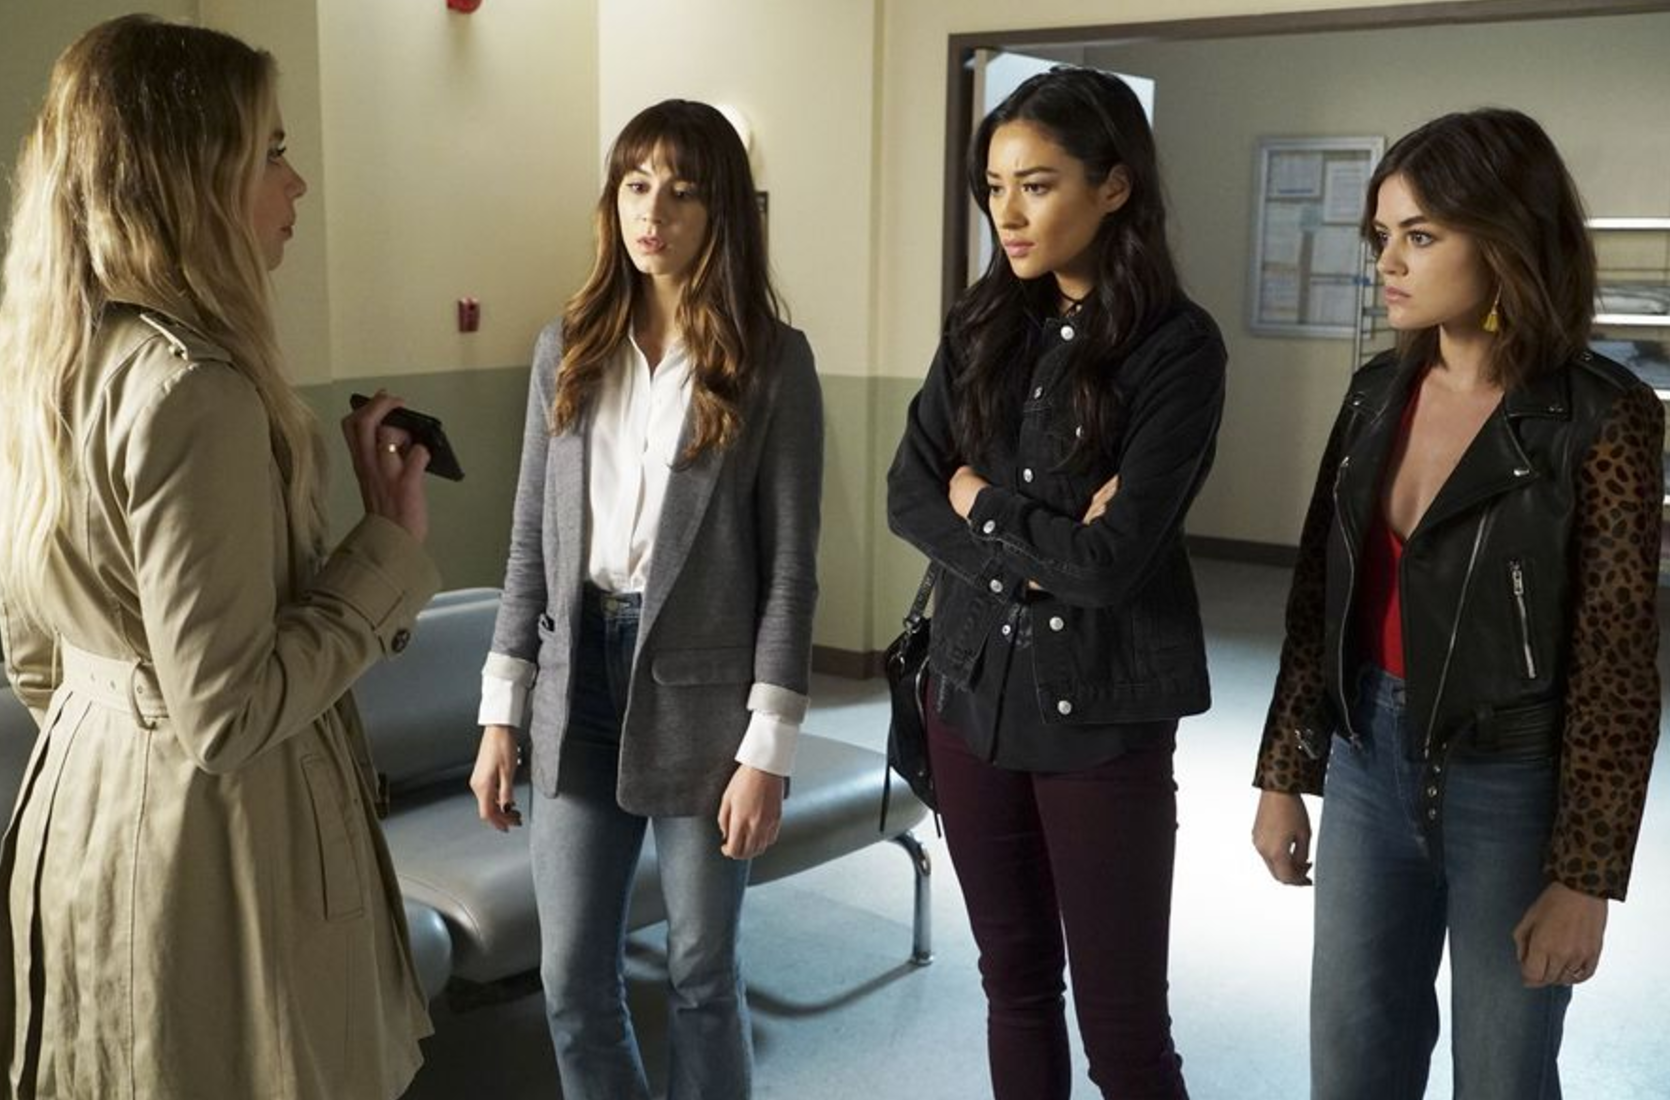 Pretty Little Liars 7.13- “Hold Your Piece”